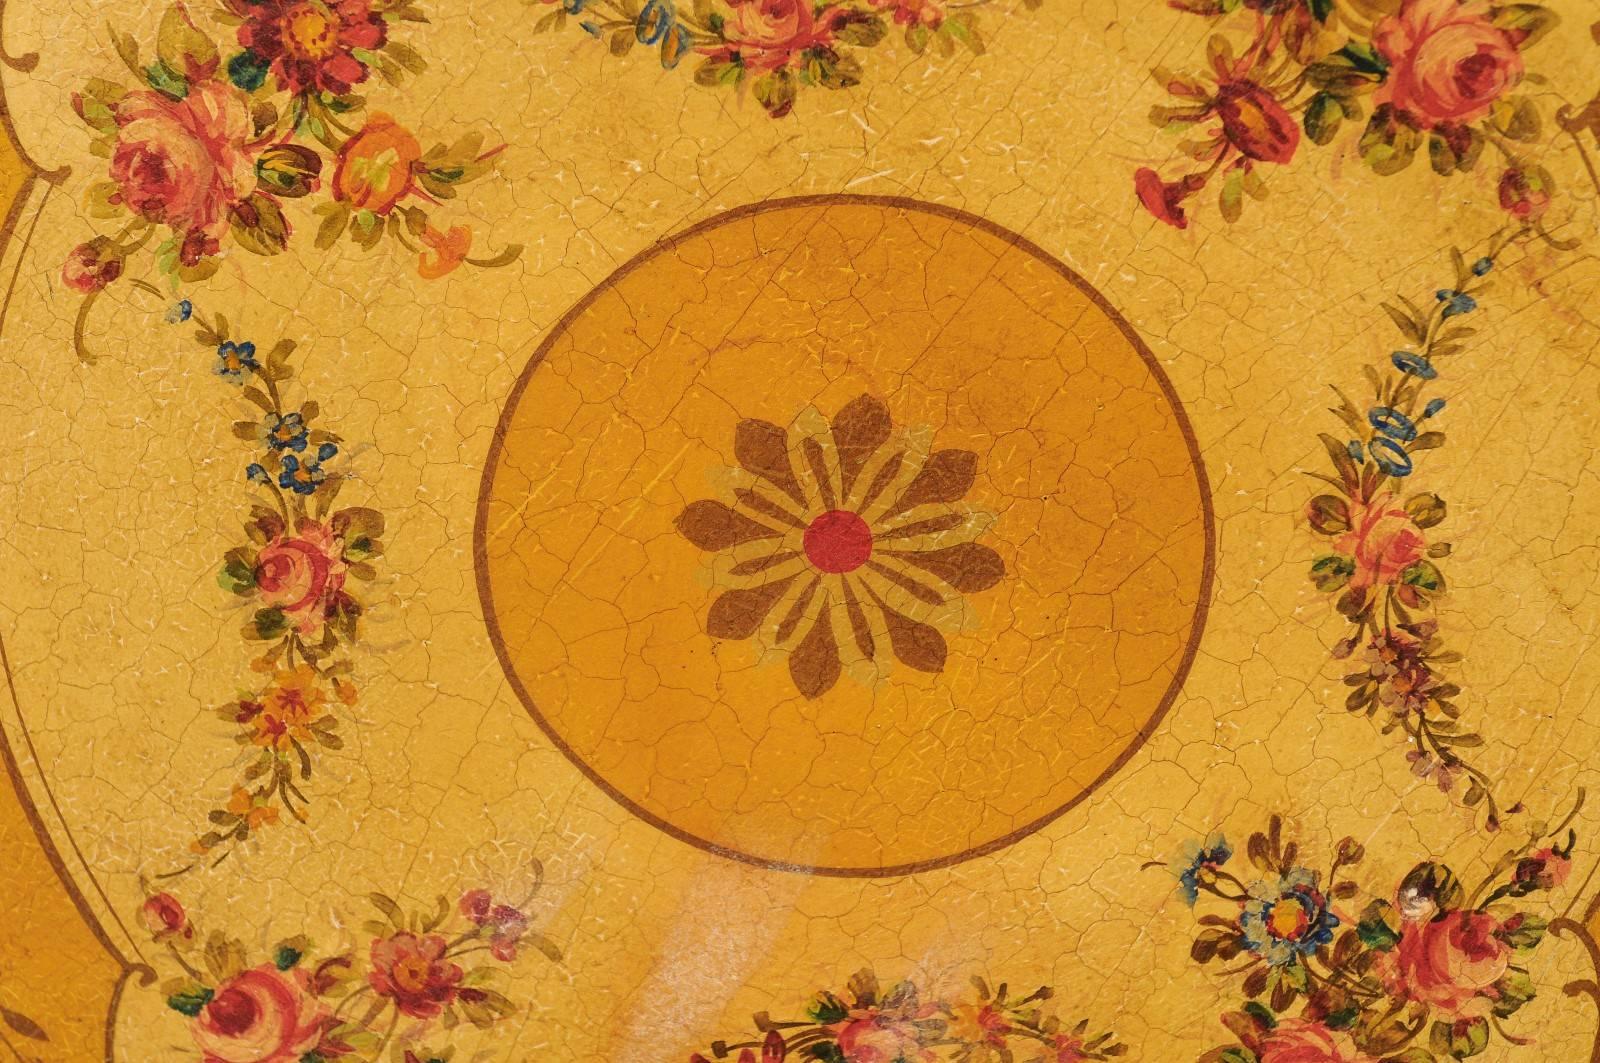 French Circular Painted Tole Tray with Floral Motifs from the 19th Century 1